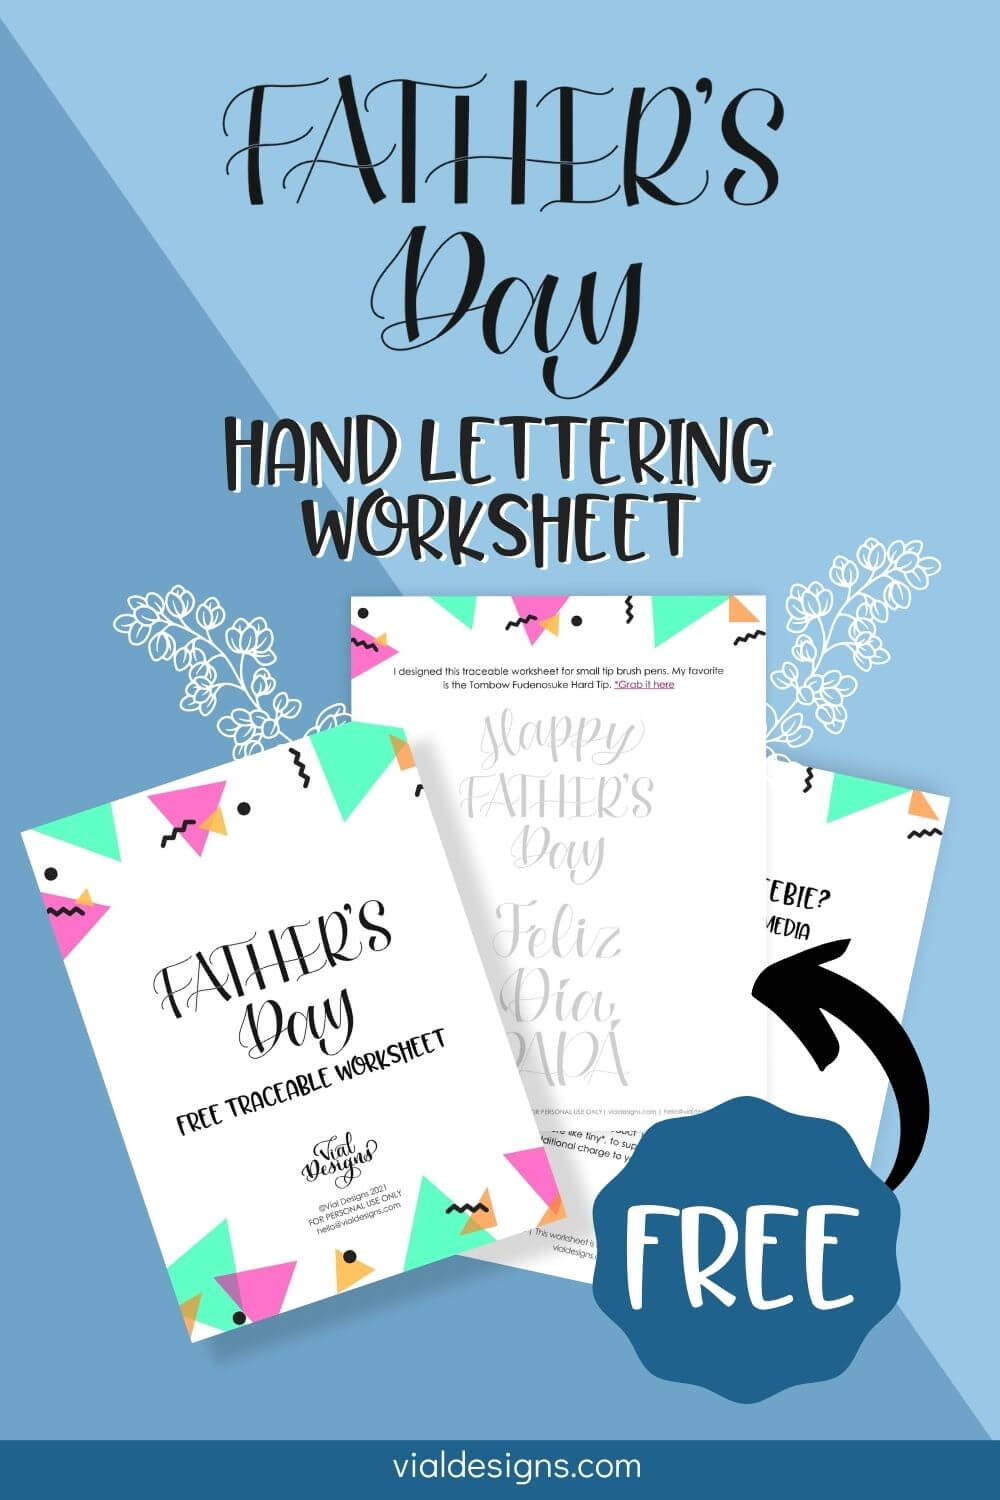 Father's Day Free Hand Lettering Worksheet Pinterest image